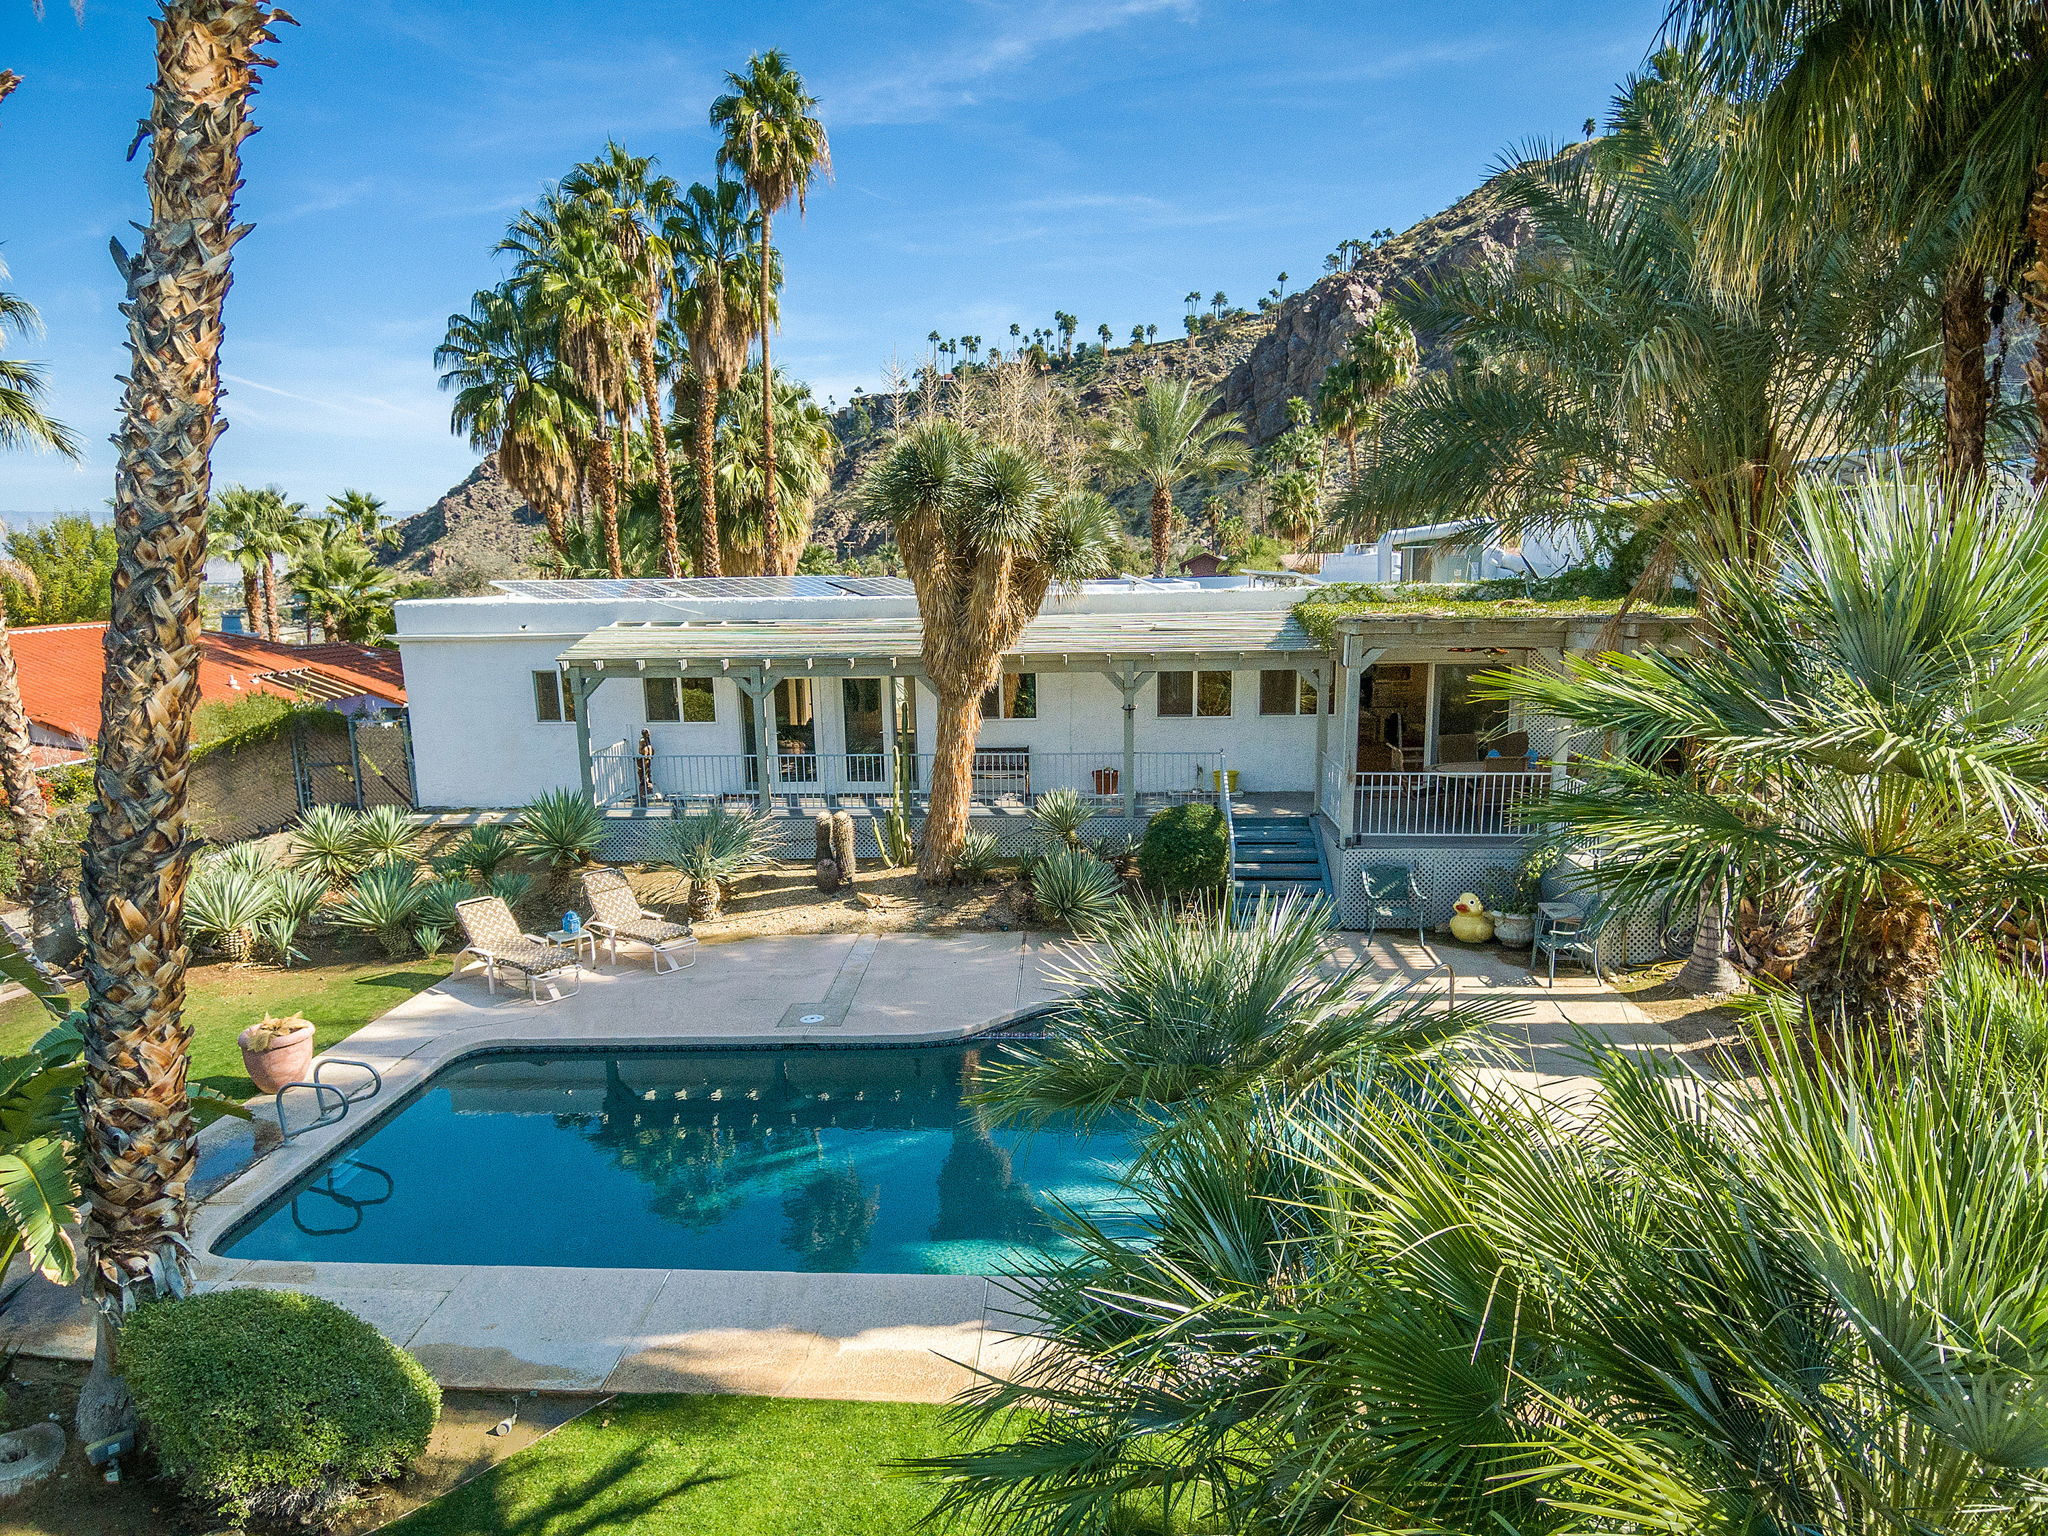  2255 S Araby Dr, Palm Springs, CA 92264, US Photo 25